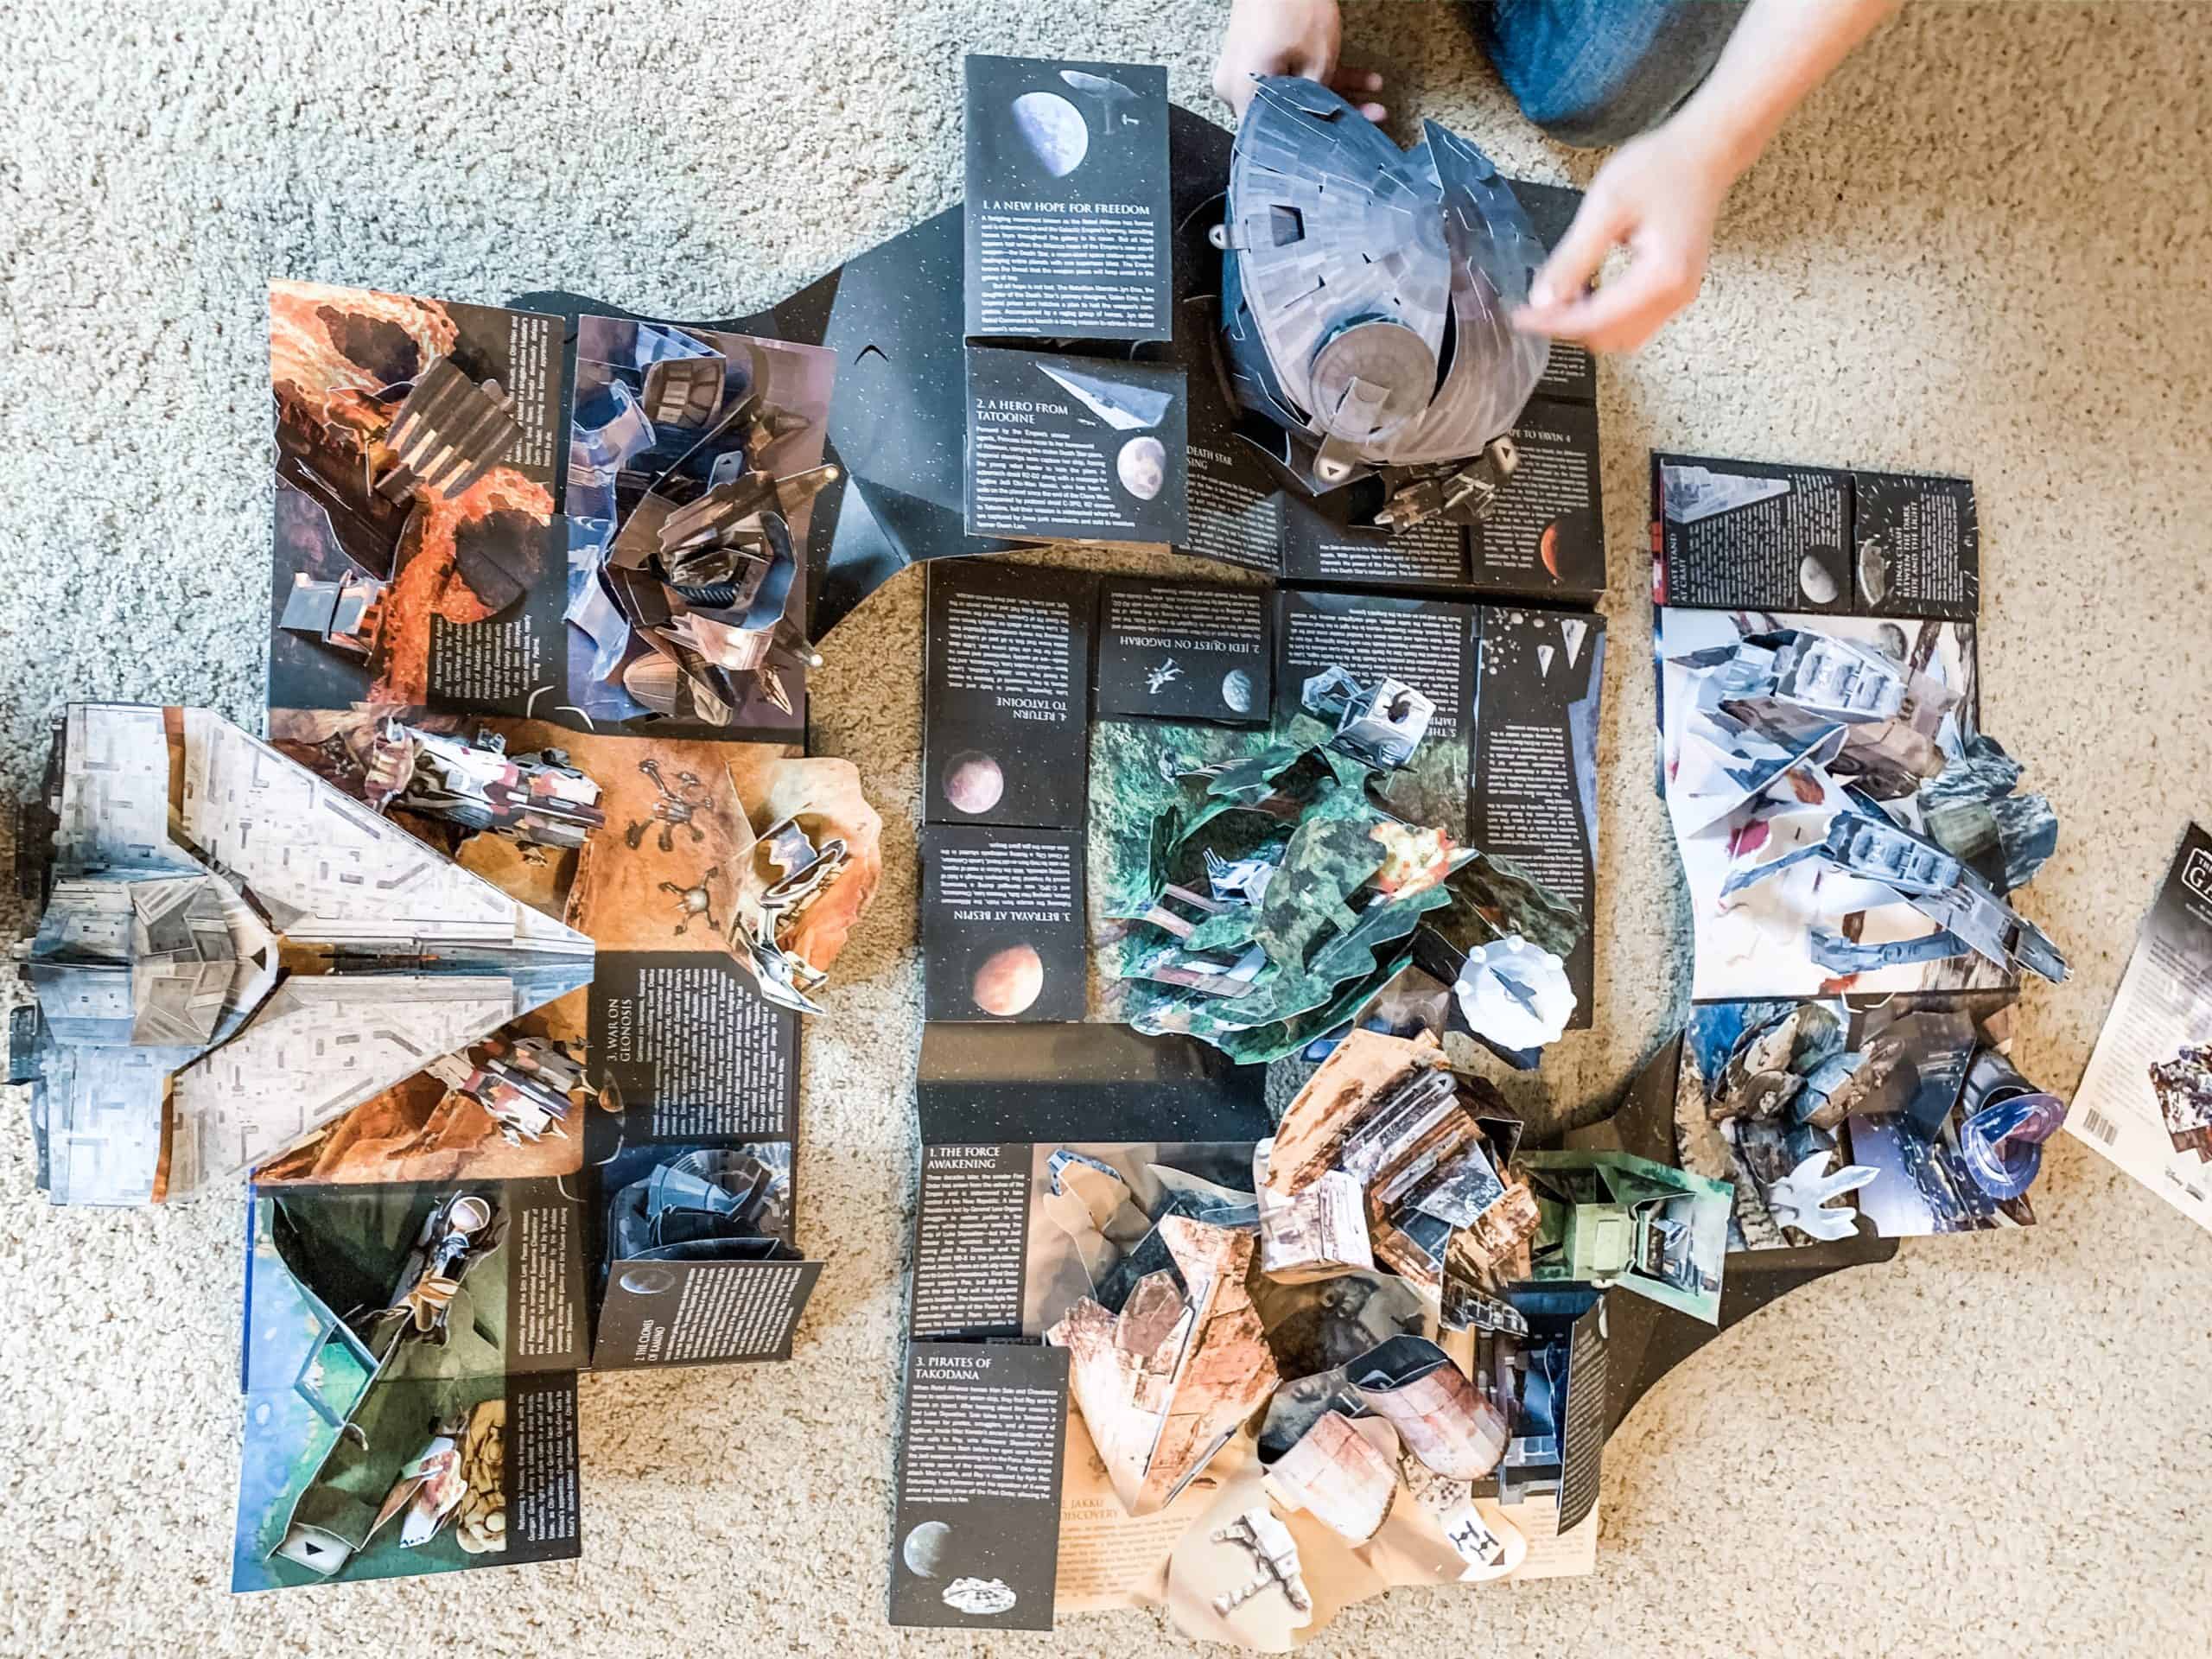 Overview of STar Wars Pop-Up Book